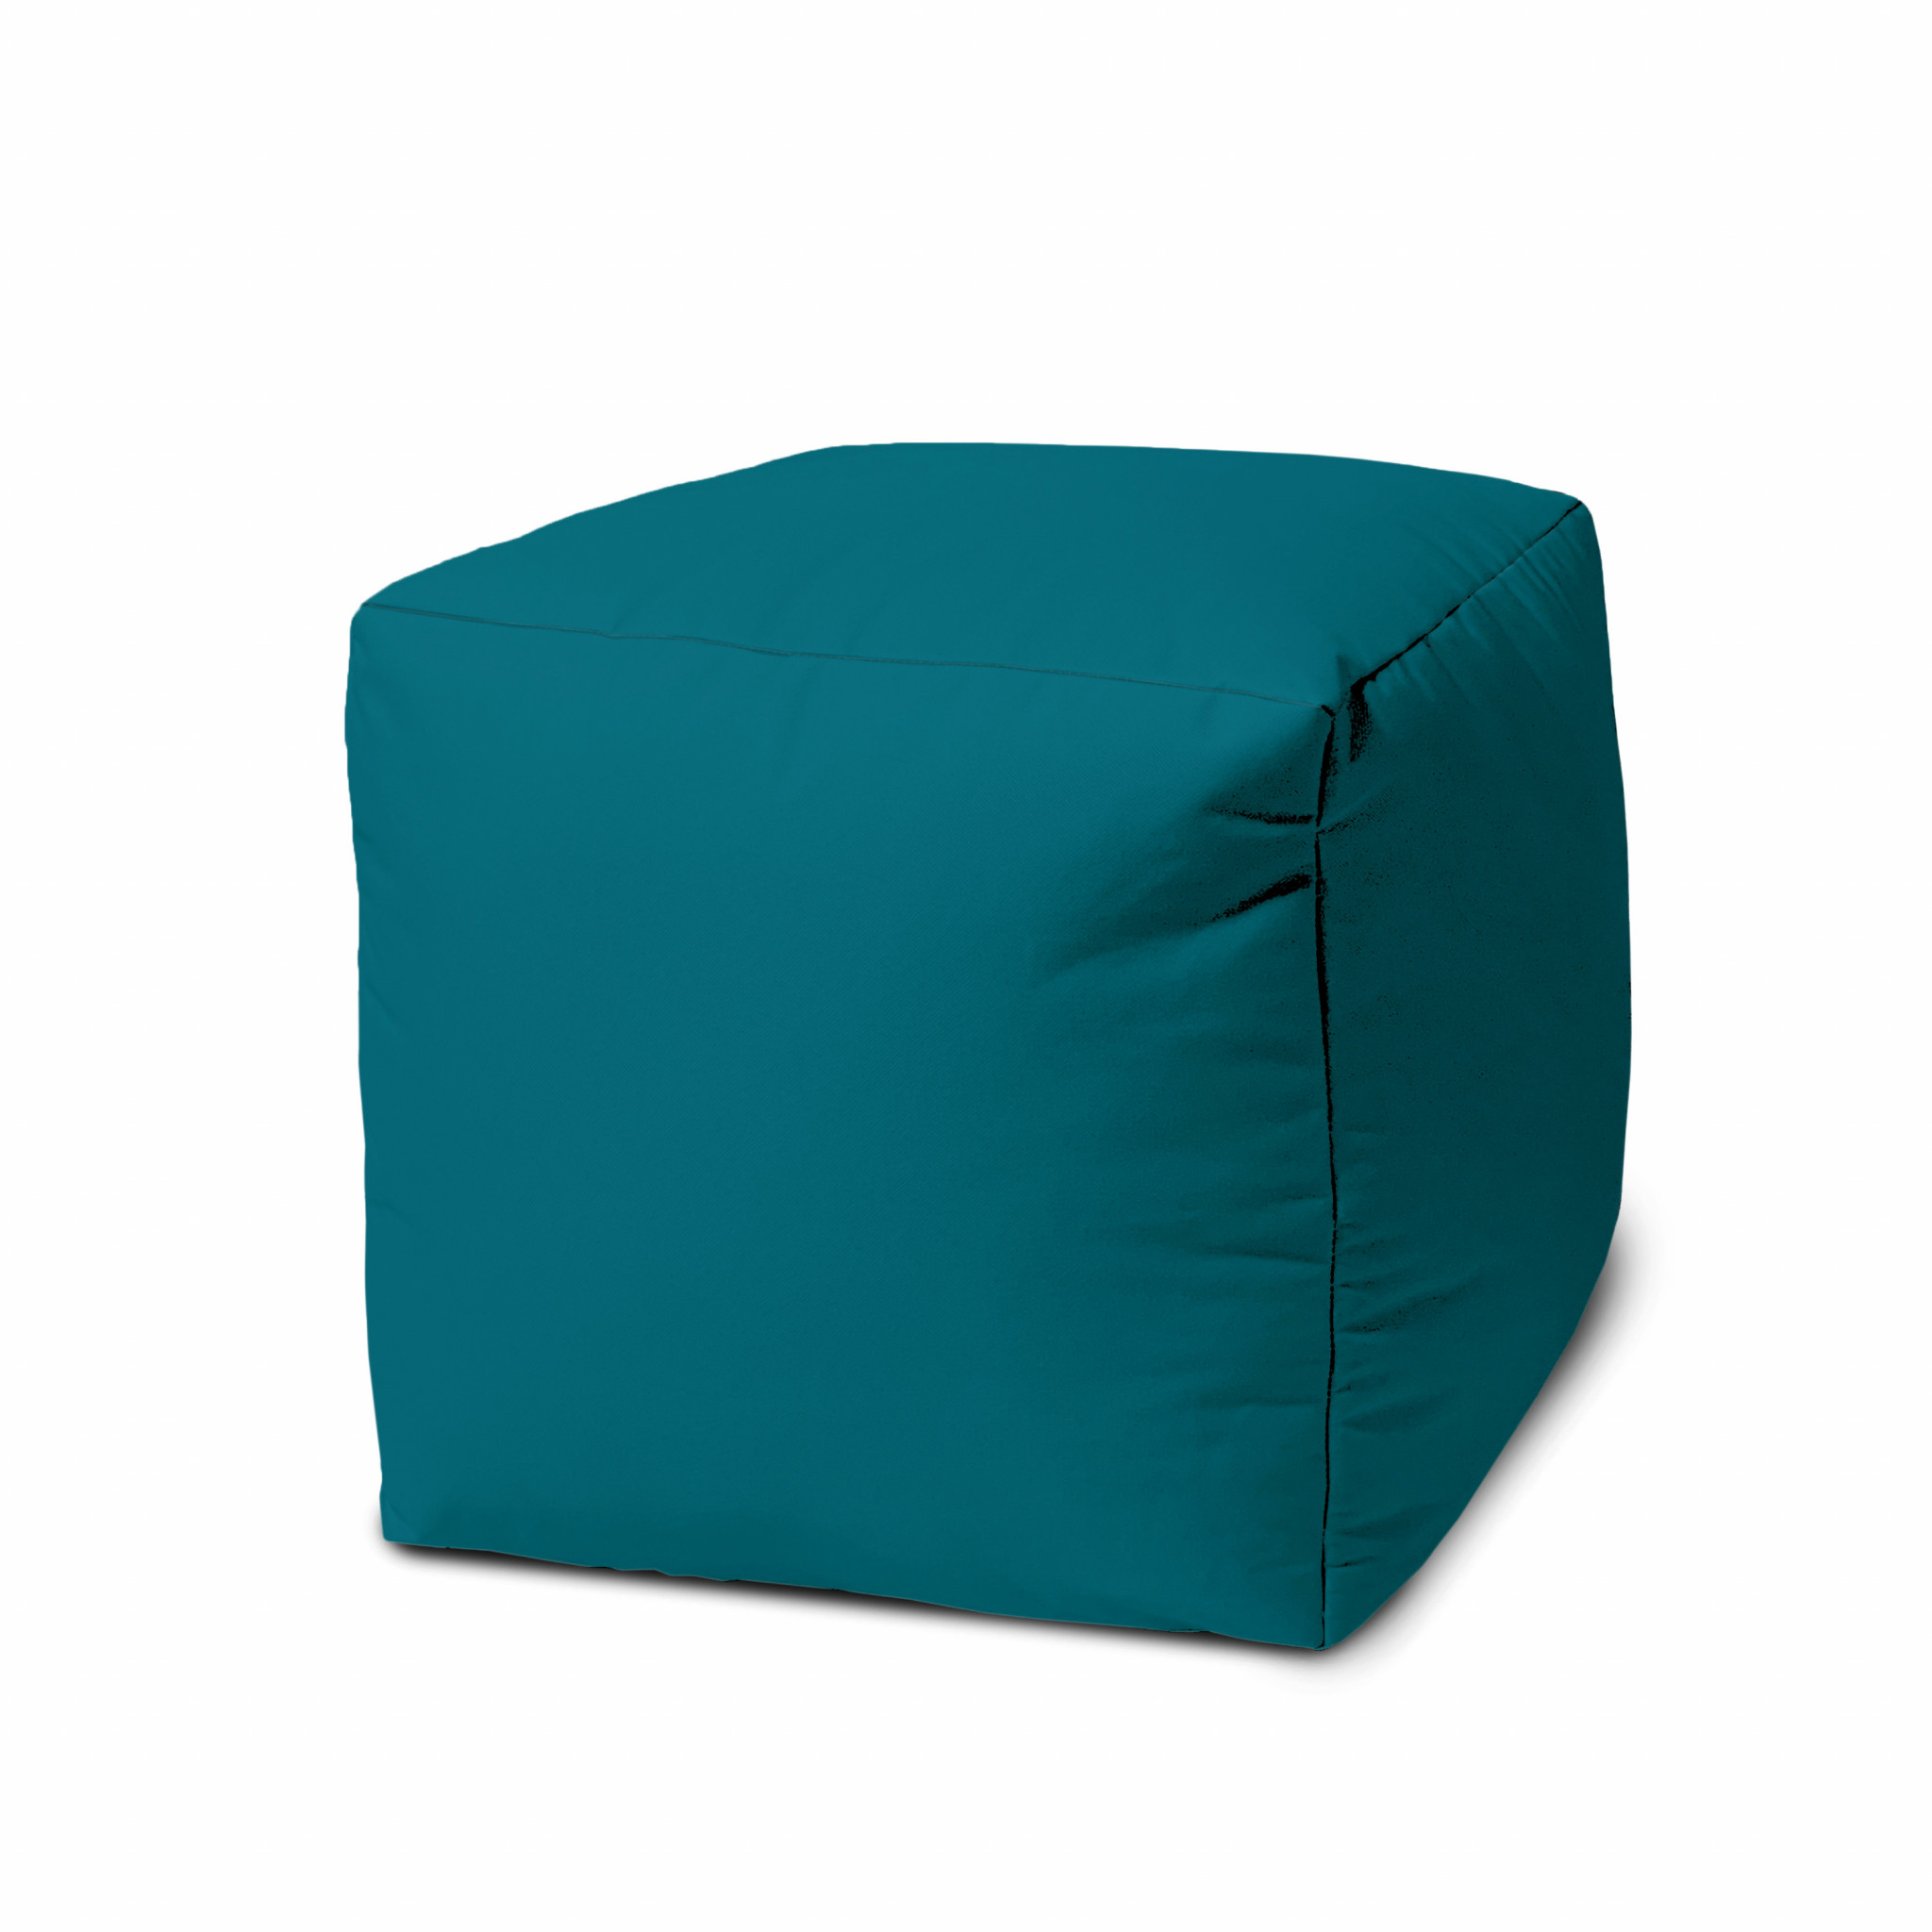 17" Cool Dark Teal Solid Color Indoor Outdoor Pouf Ottoman-474152-1